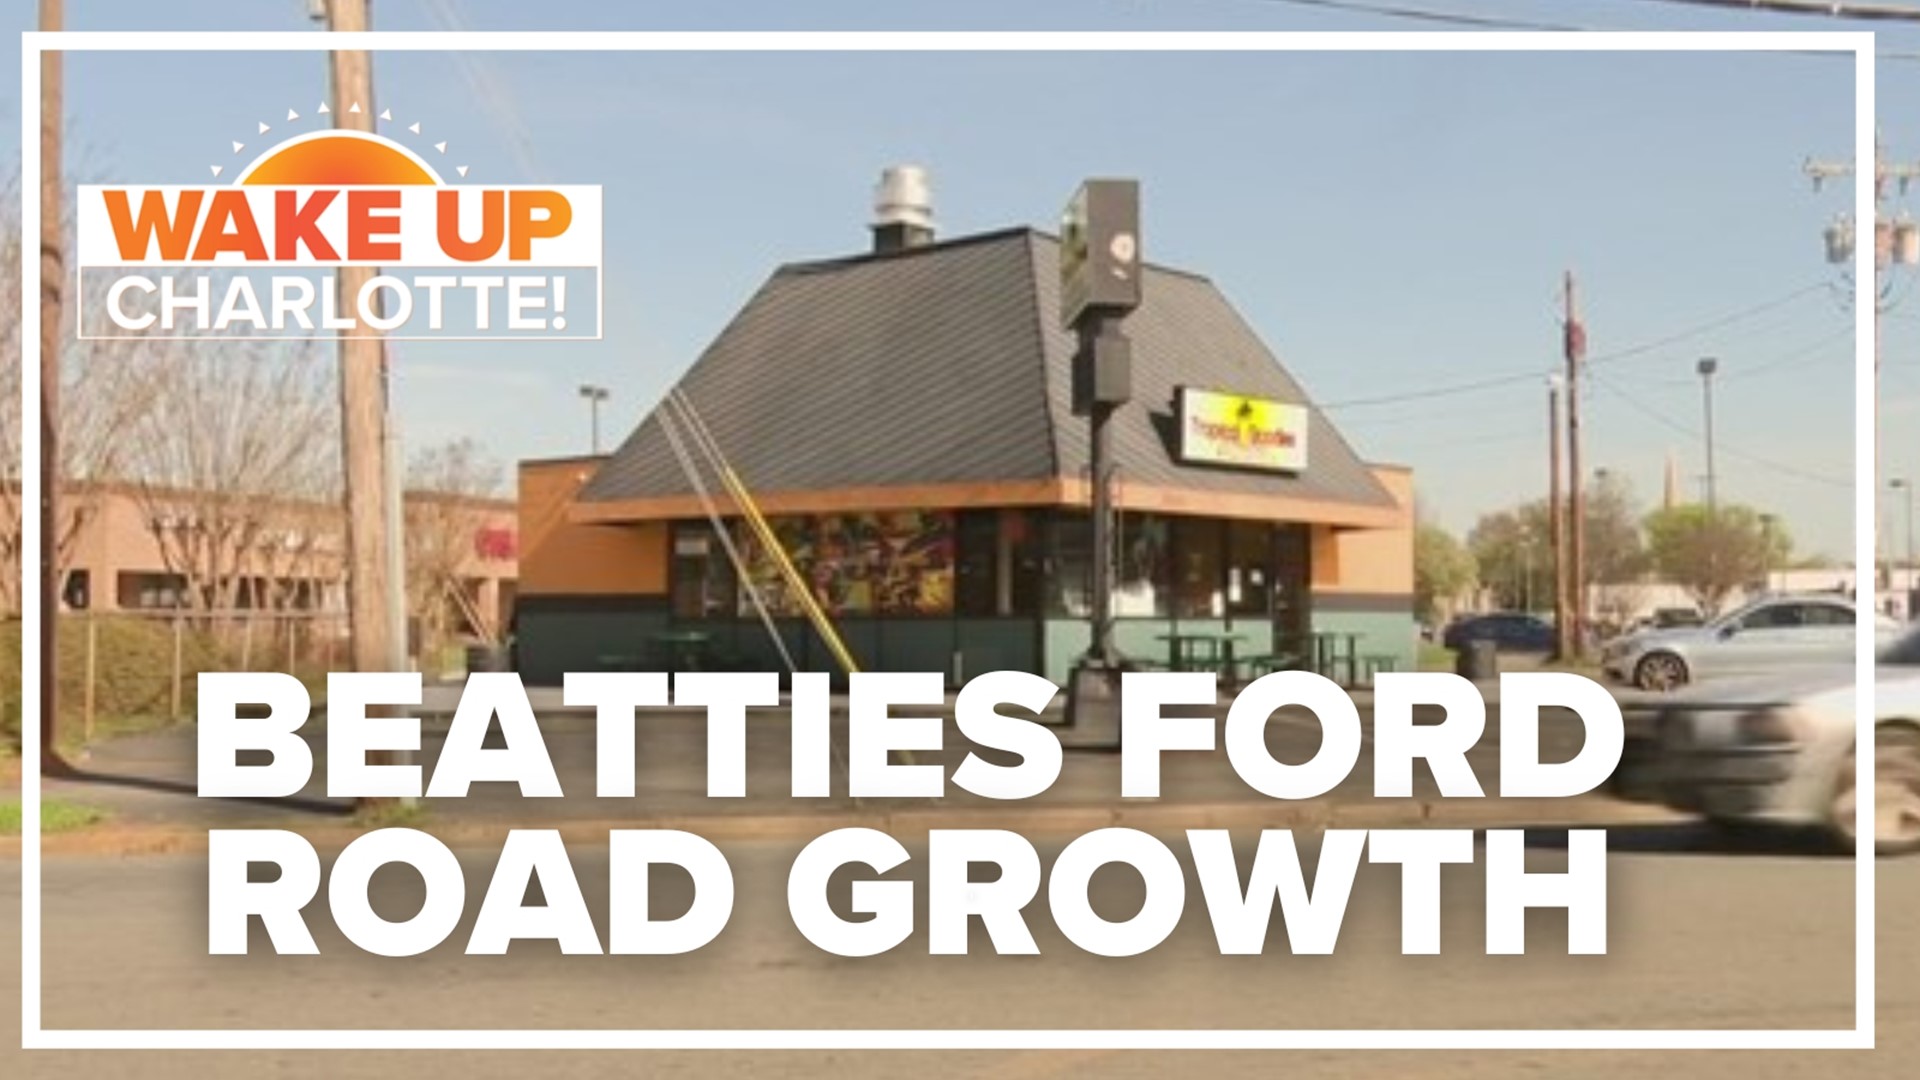 As new businesses continue to pop up on Beatties Ford, some have high hopes for the future.